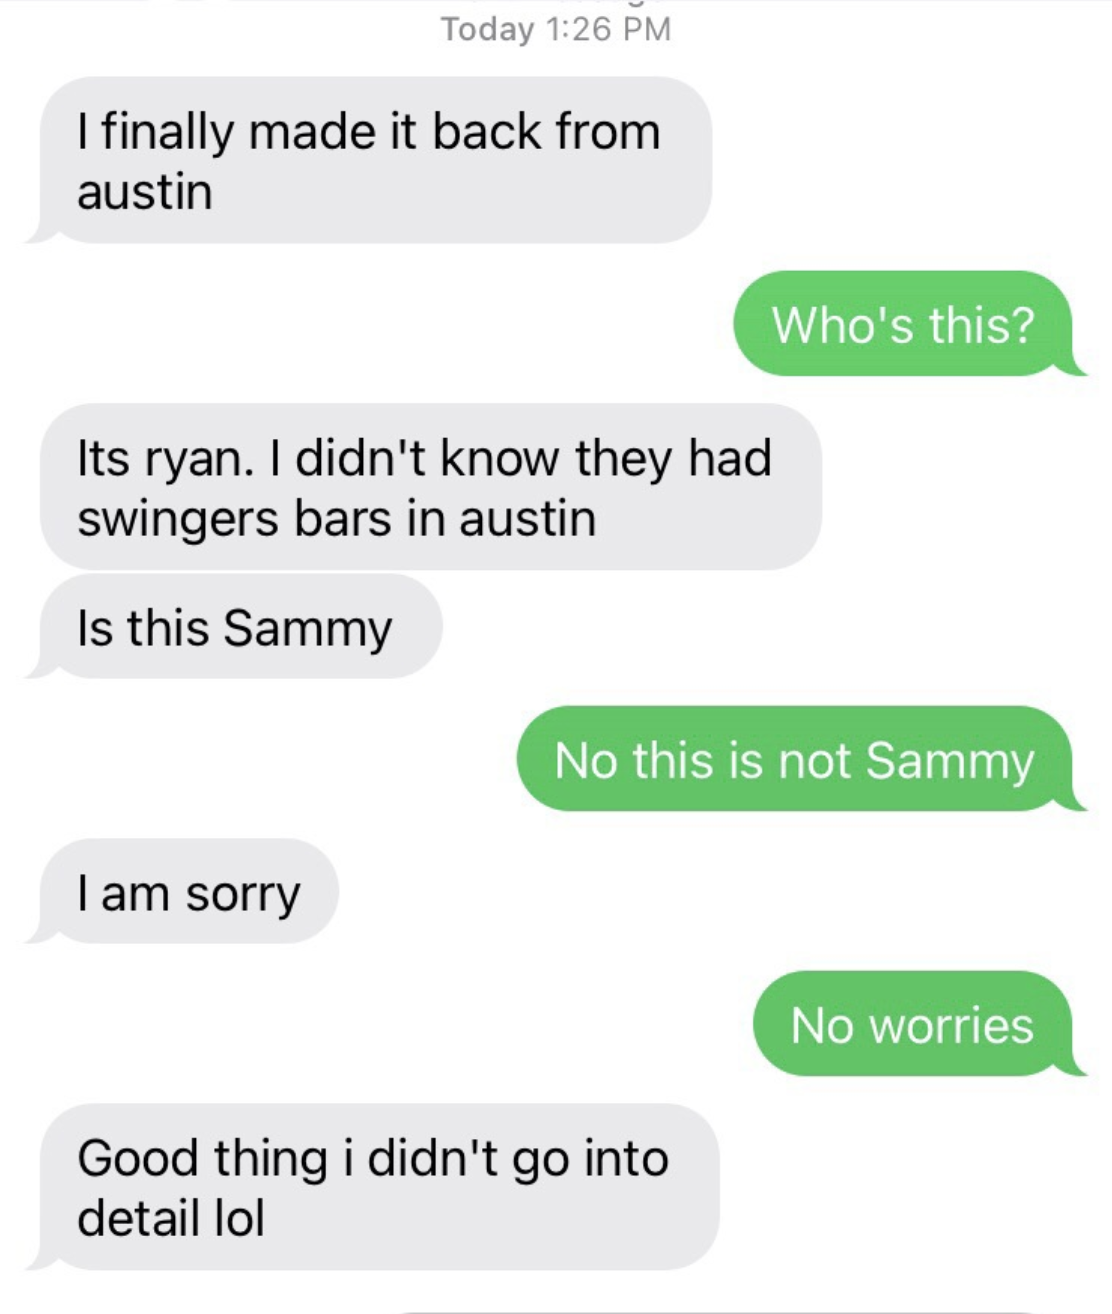 wrong number text of someone sharing details of swinging